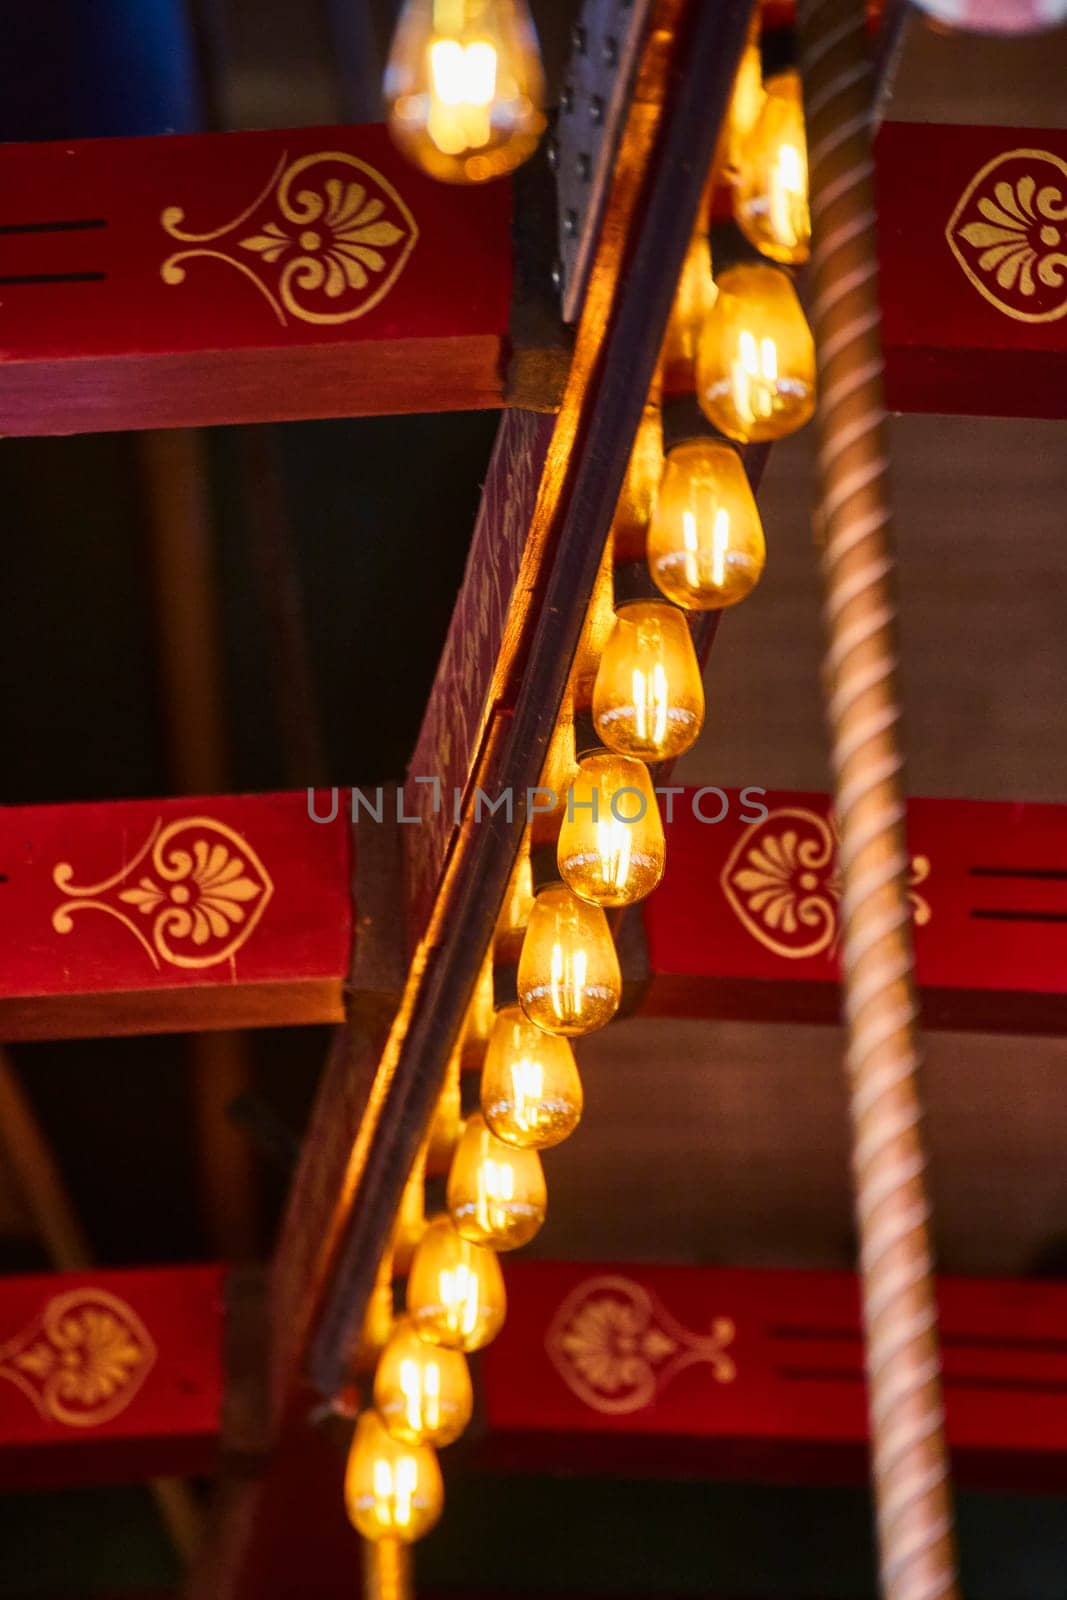 Close-up of a vibrant red and gold carousel at Fort Wayne Children's Zoo, Indiana, glowing with warmth and nostalgia.